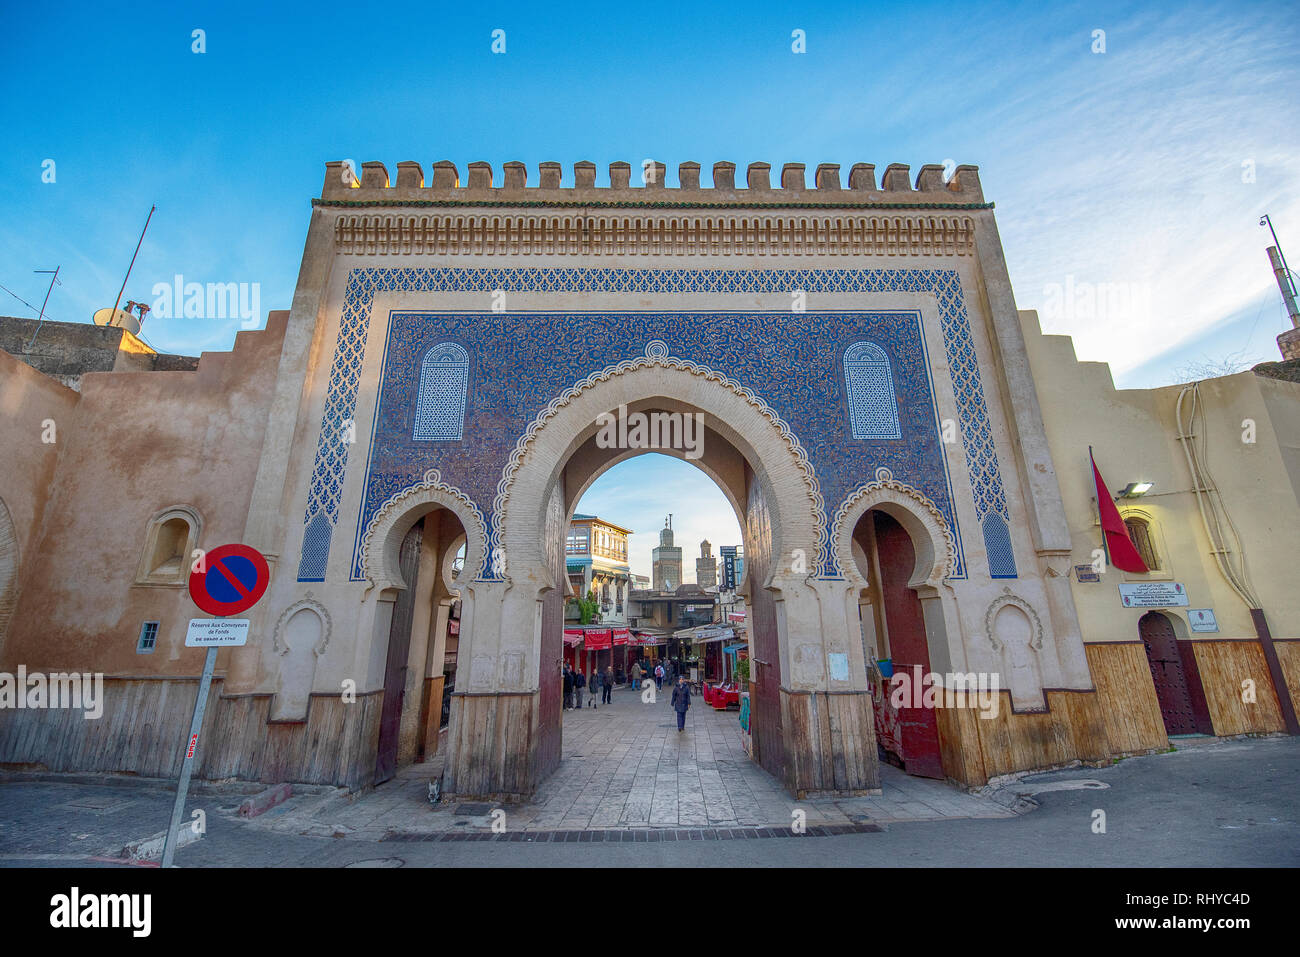 The blue Gate or the Bab Bou Jeloud (Boujeloud) in the old City in the historical Town of Fez. Entrance to the old town medina of Fes, Morocco Stock Photo